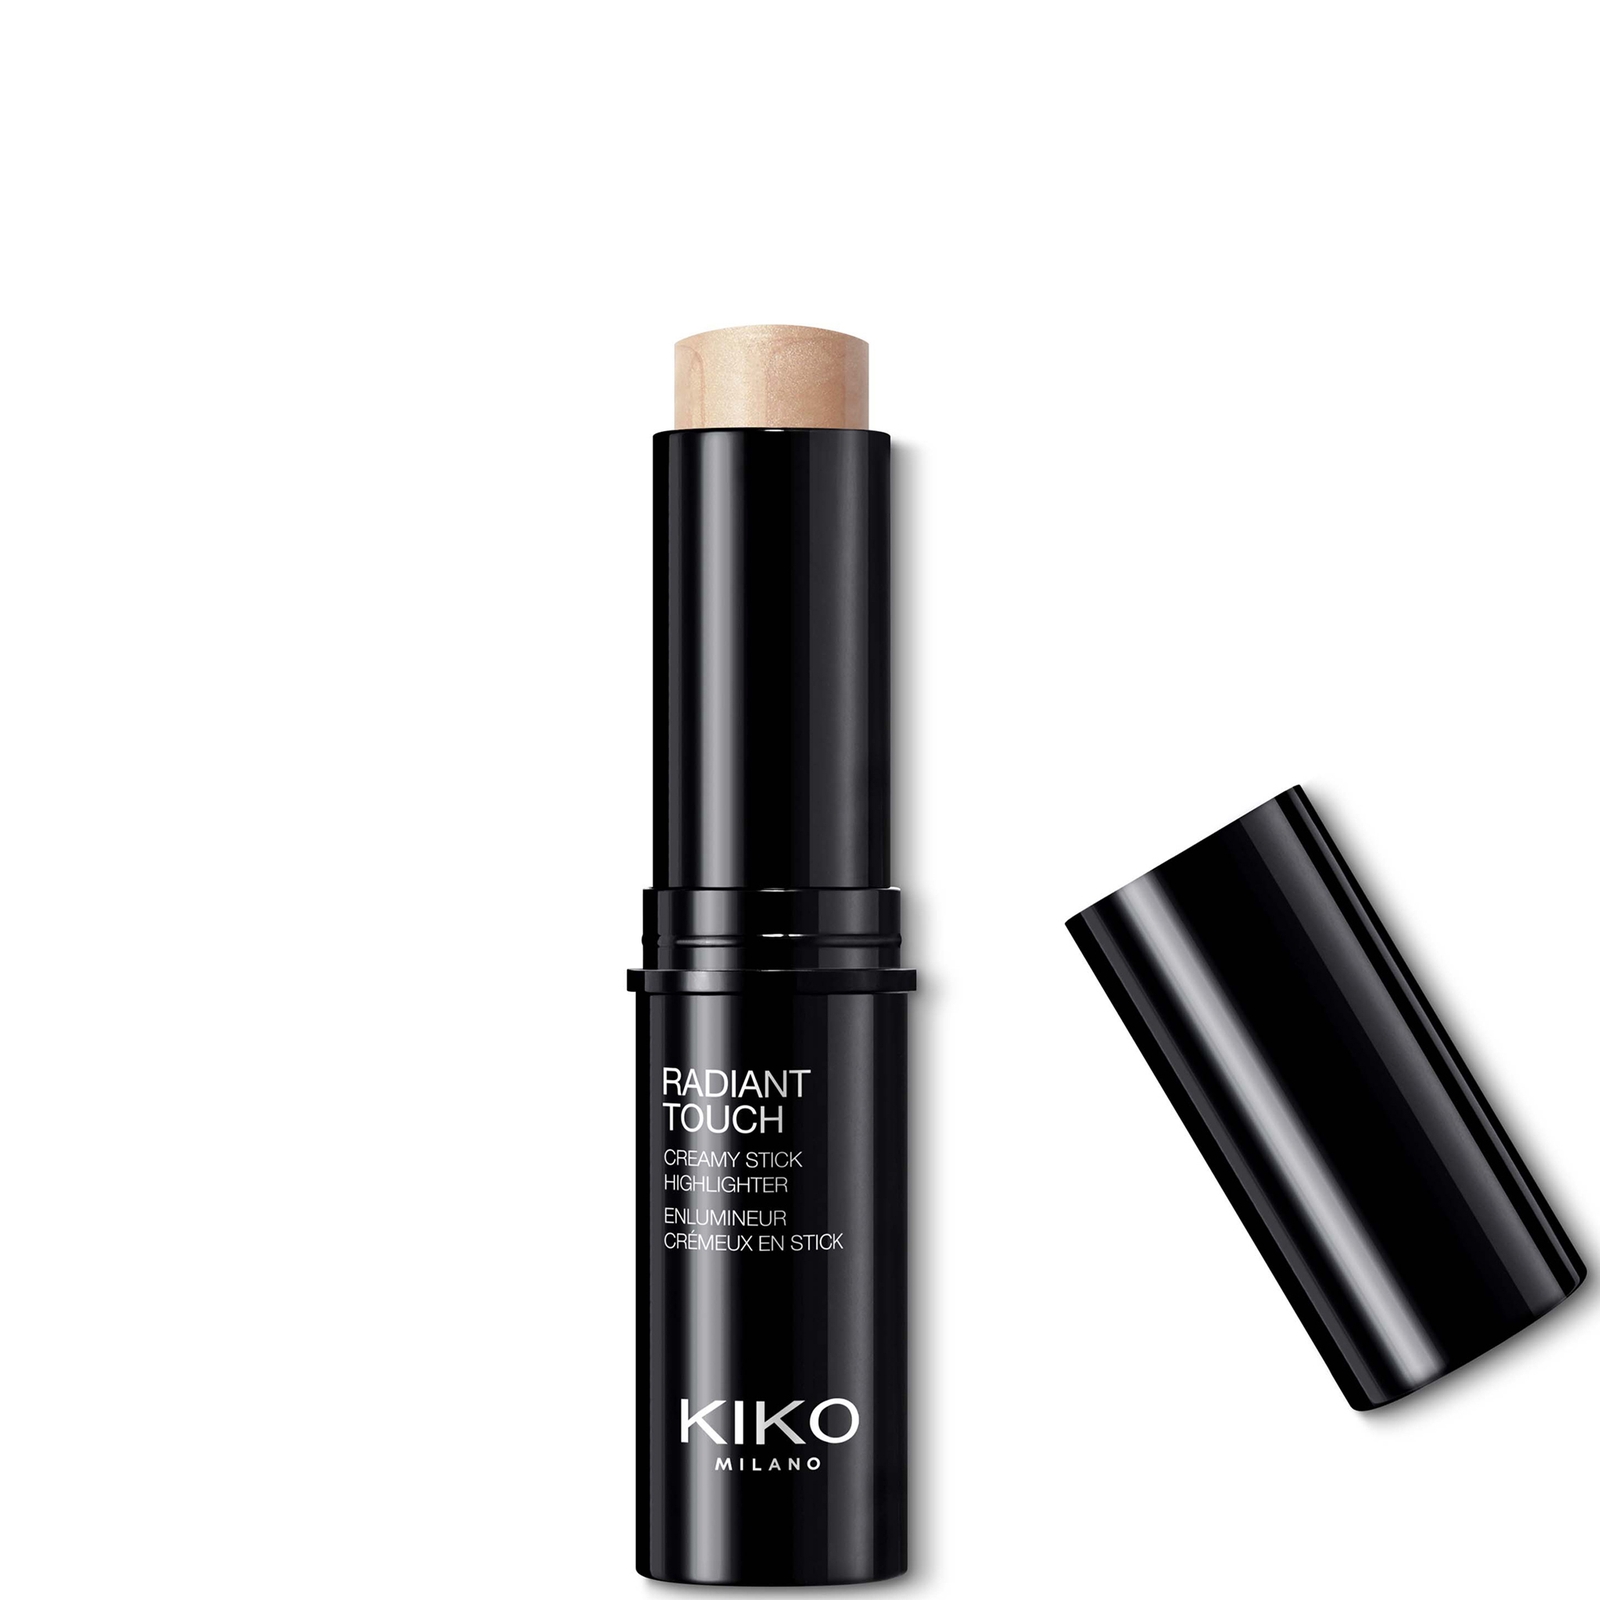 KIKO Milano Radiant Touch Creamy Stick Highlighter 10g (Various Shades) - 100 Gold